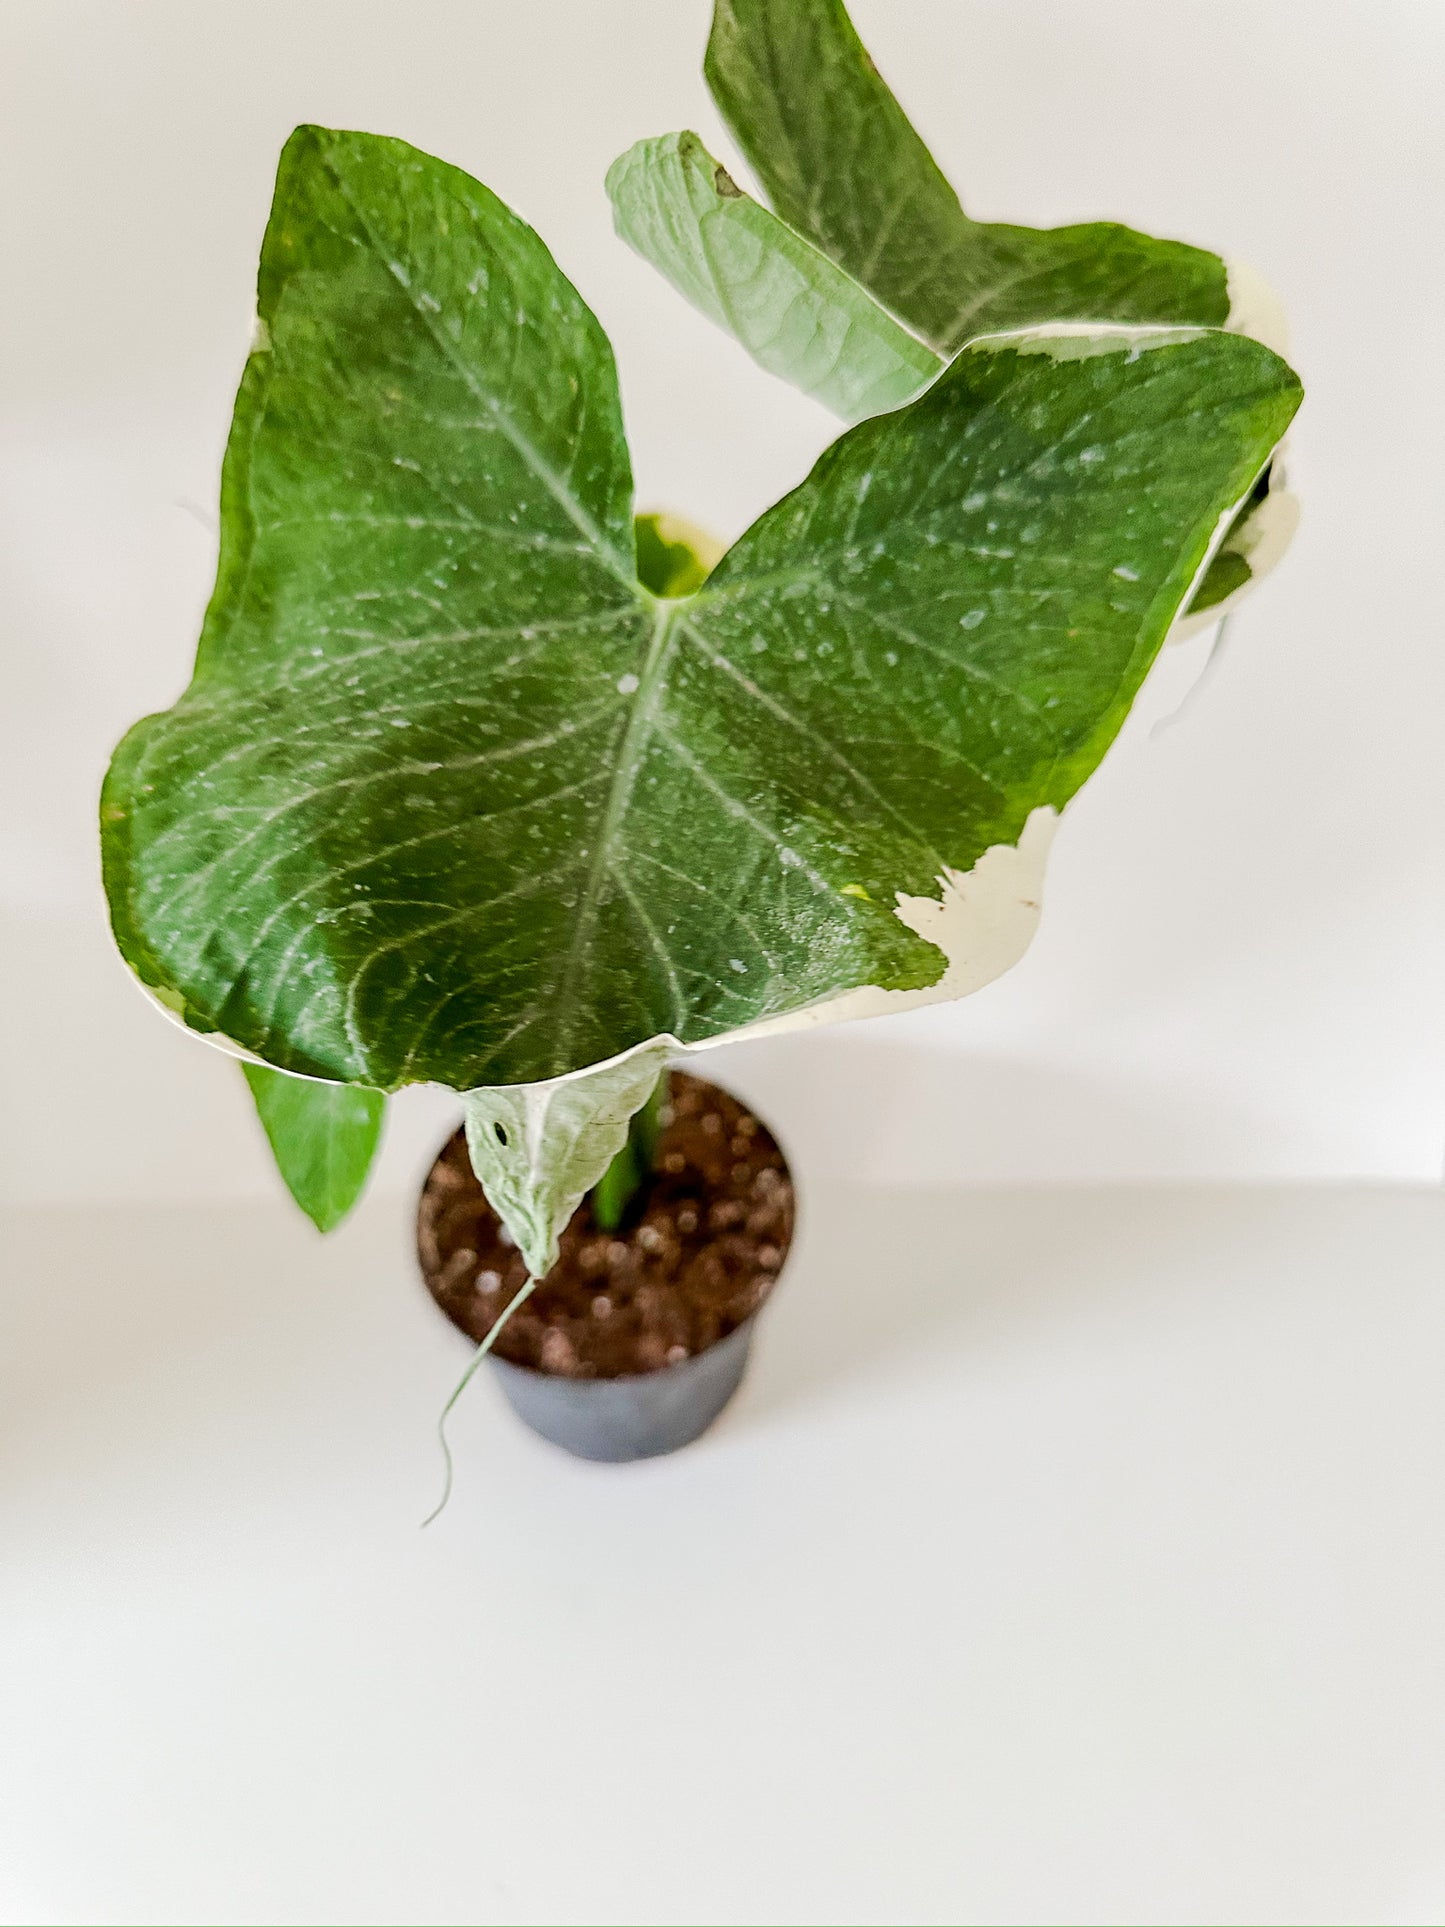 Alocasia 'Mickey Mouse' (Xanthosoma Sagittifolium 'Variegatum Monstrosum')- Large Mickey Mouse Shaped Leaves With Cream Yellow Variegation- (4 Inch or 6 Inch Nursery Pot)